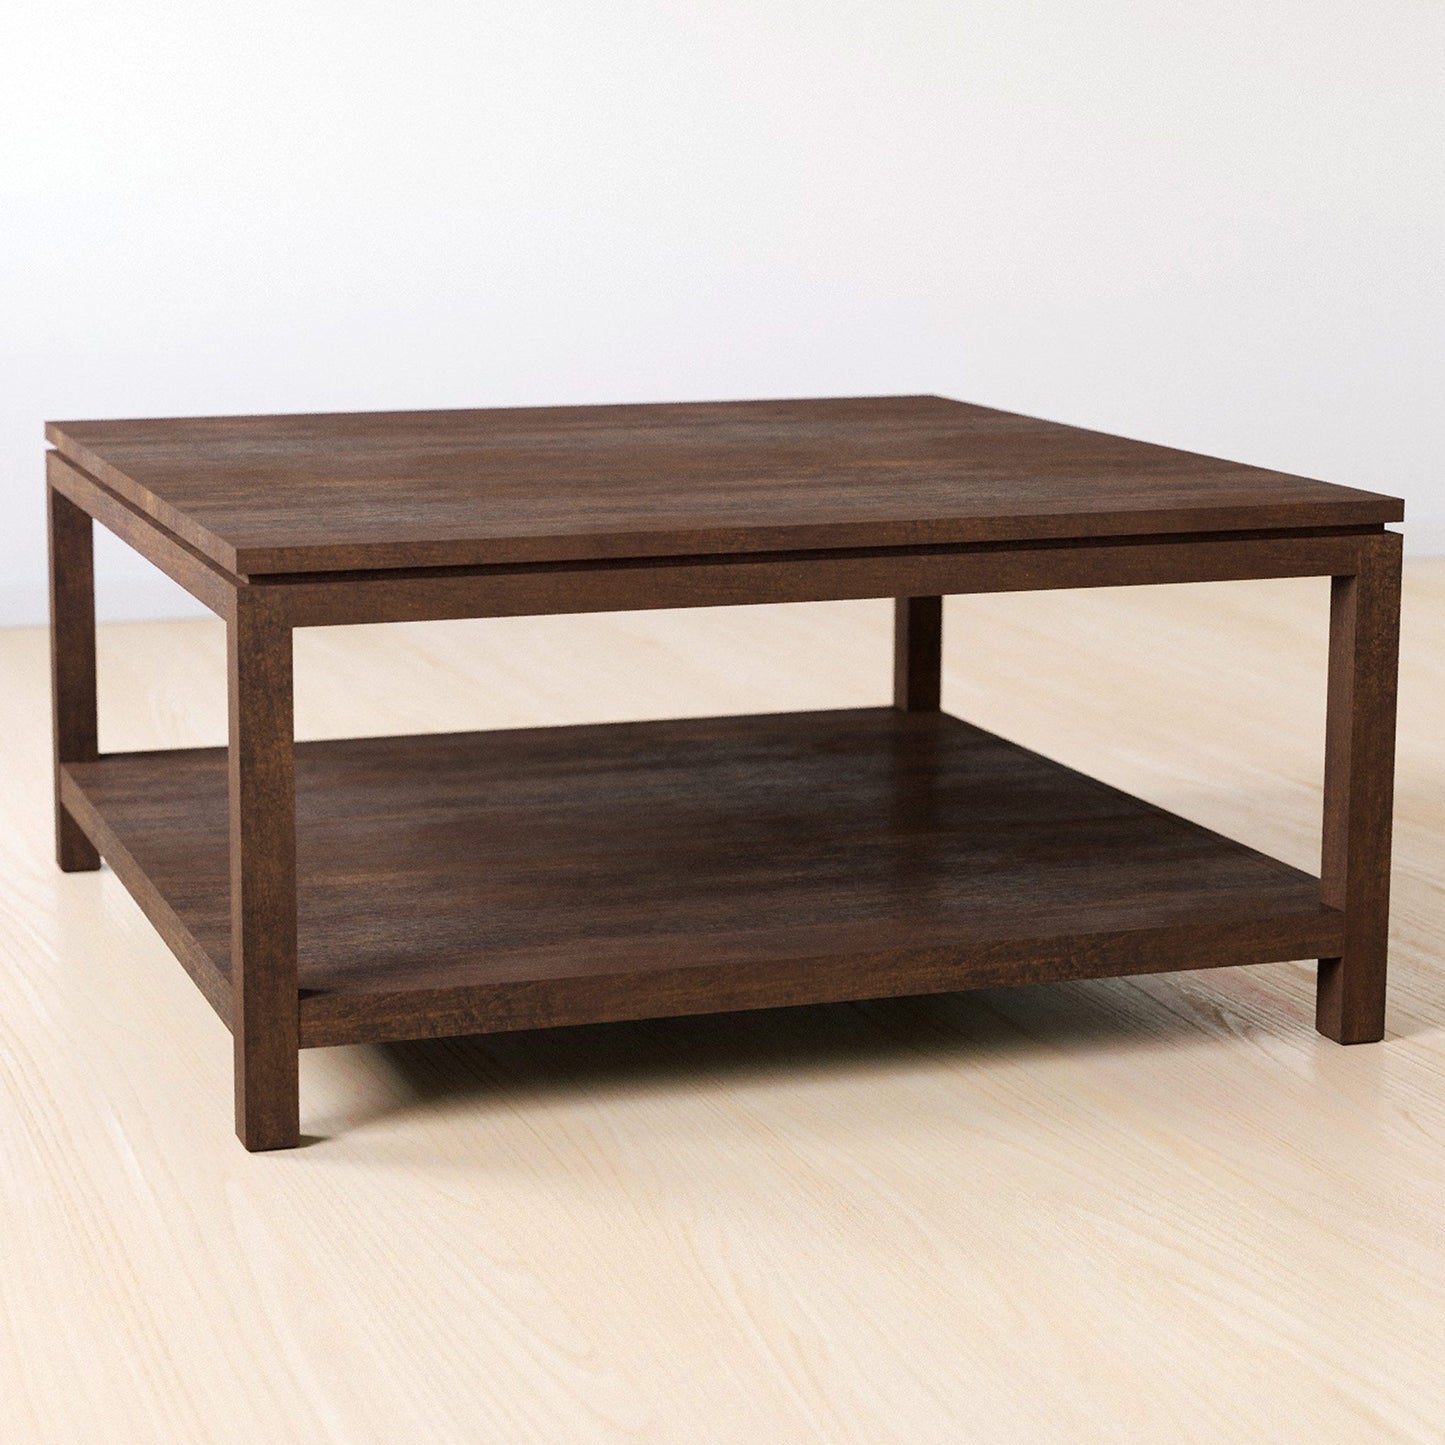 Dwyer Square Coffee Table